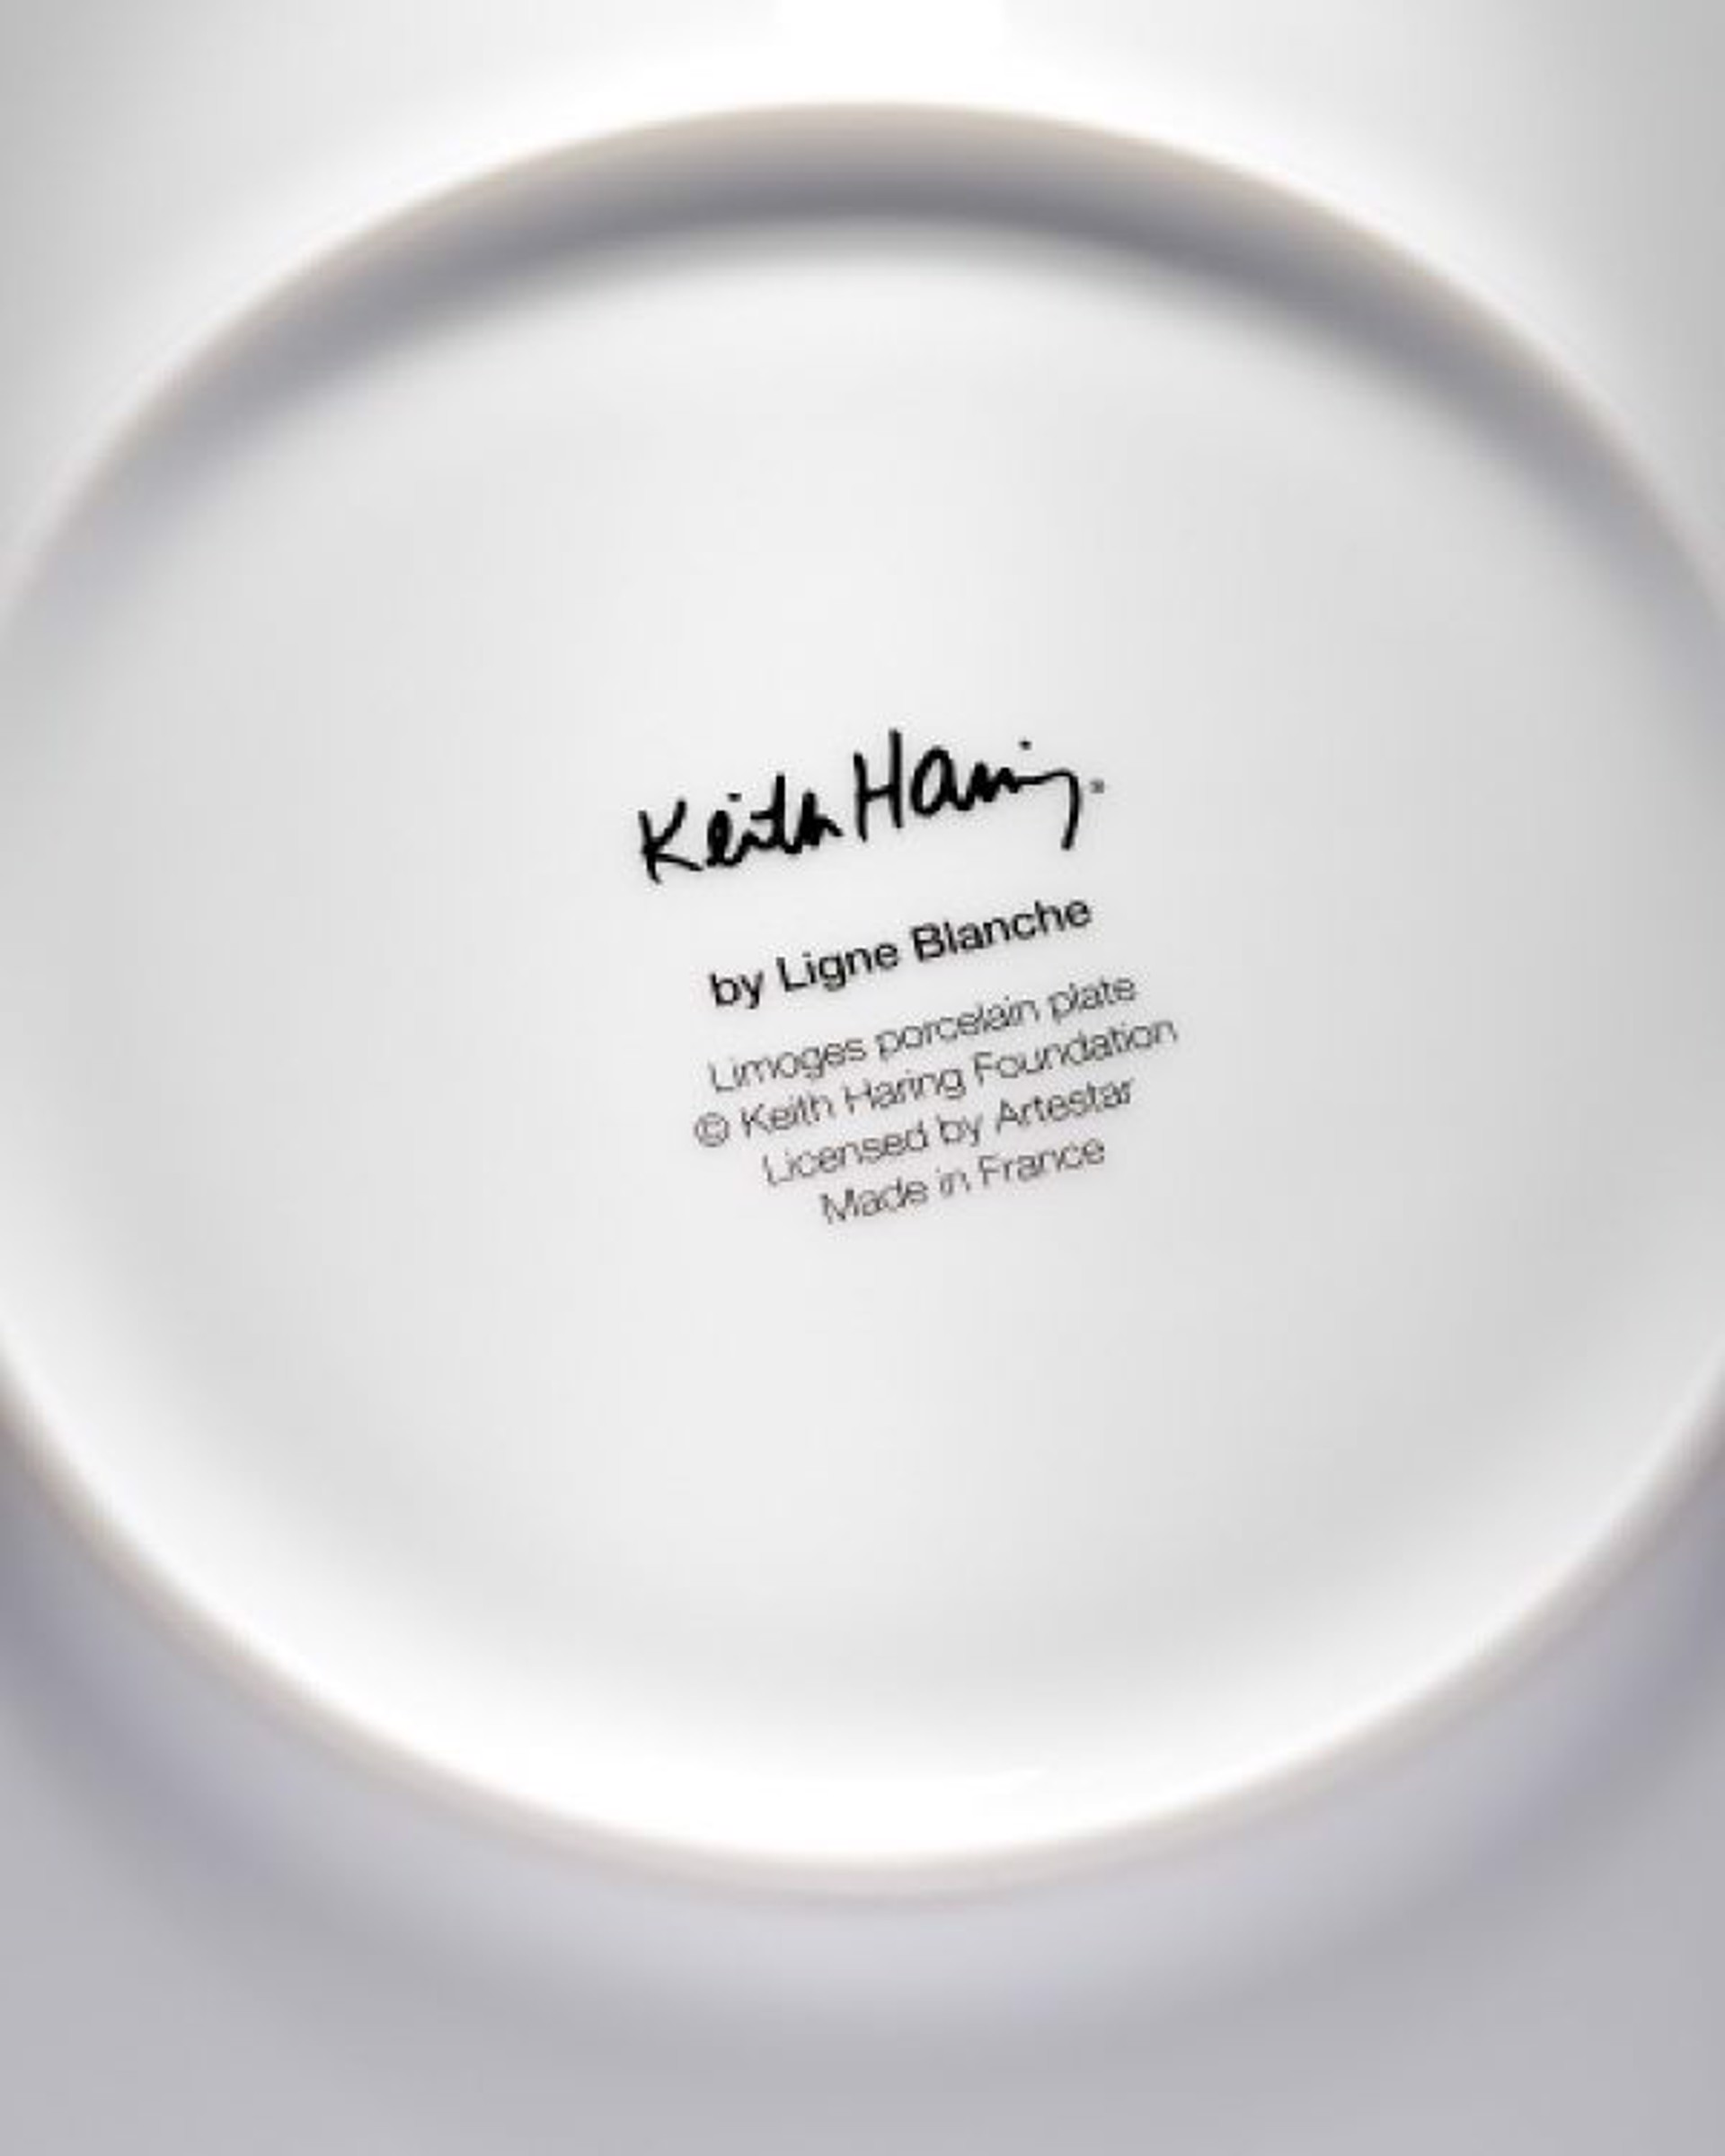 Red on White Plate by Keith Haring